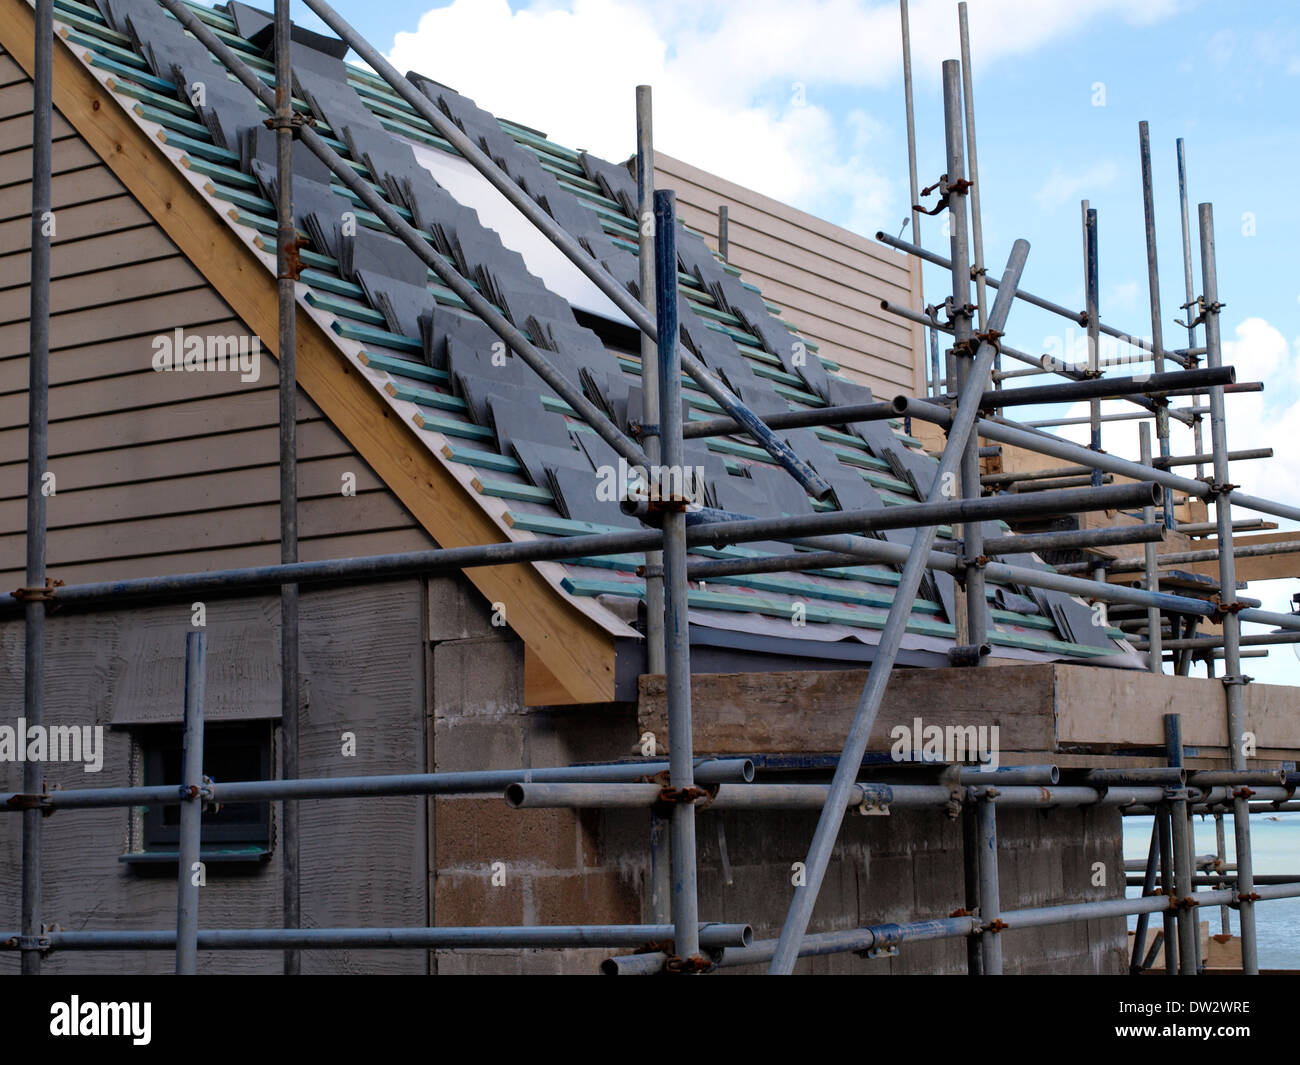 Tiles stacked on new roof, New fisherman's store rooms with offices above being built, Newquay Harbour, Cornwall, UK Stock Photo